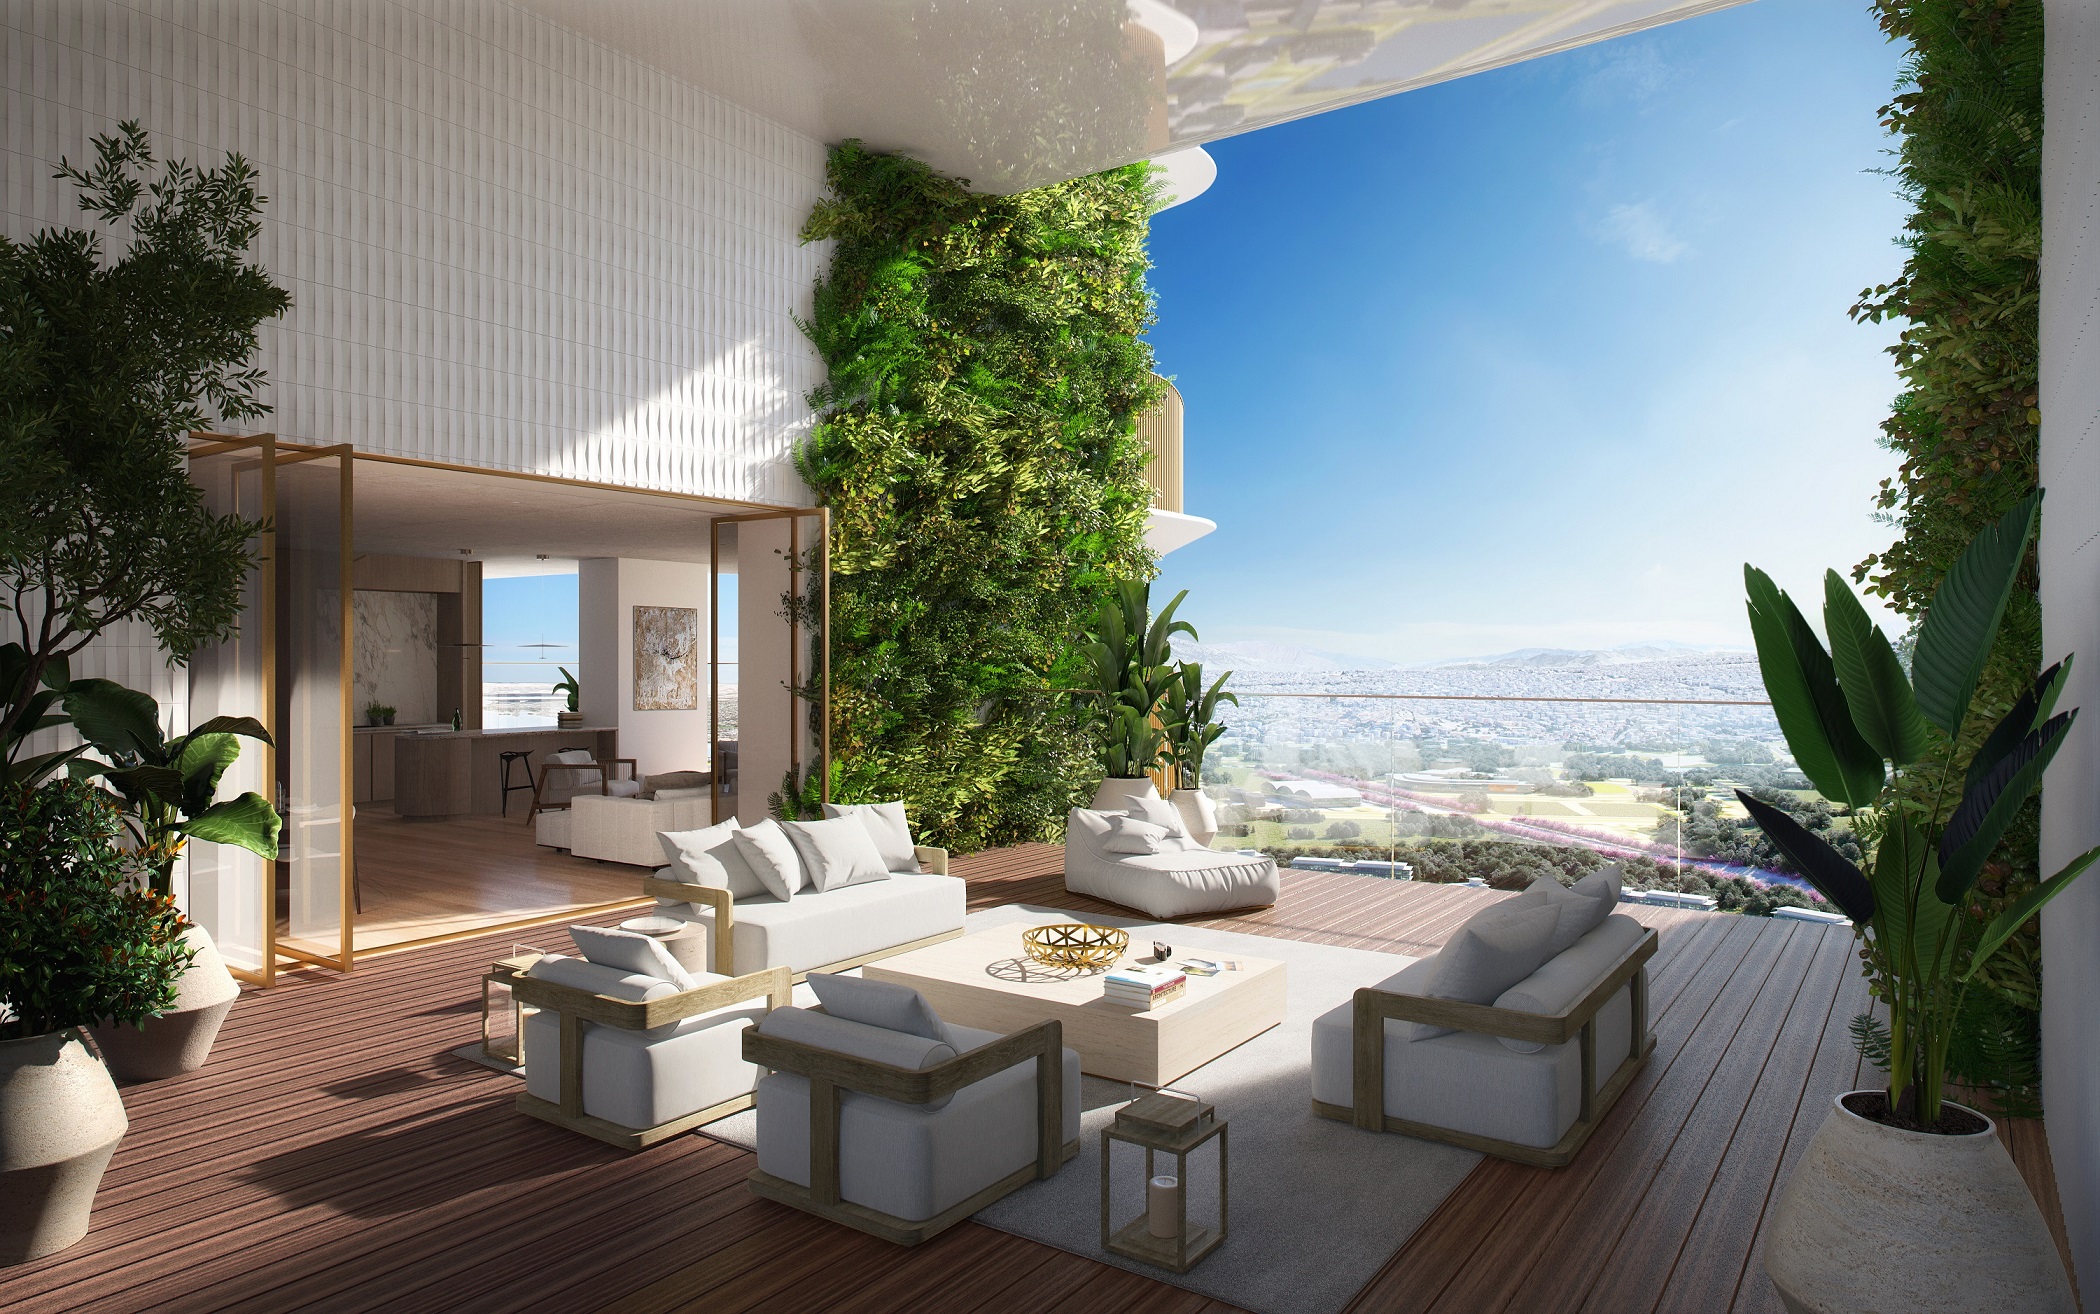 Marina Tower: Multinational interest in luxury homes